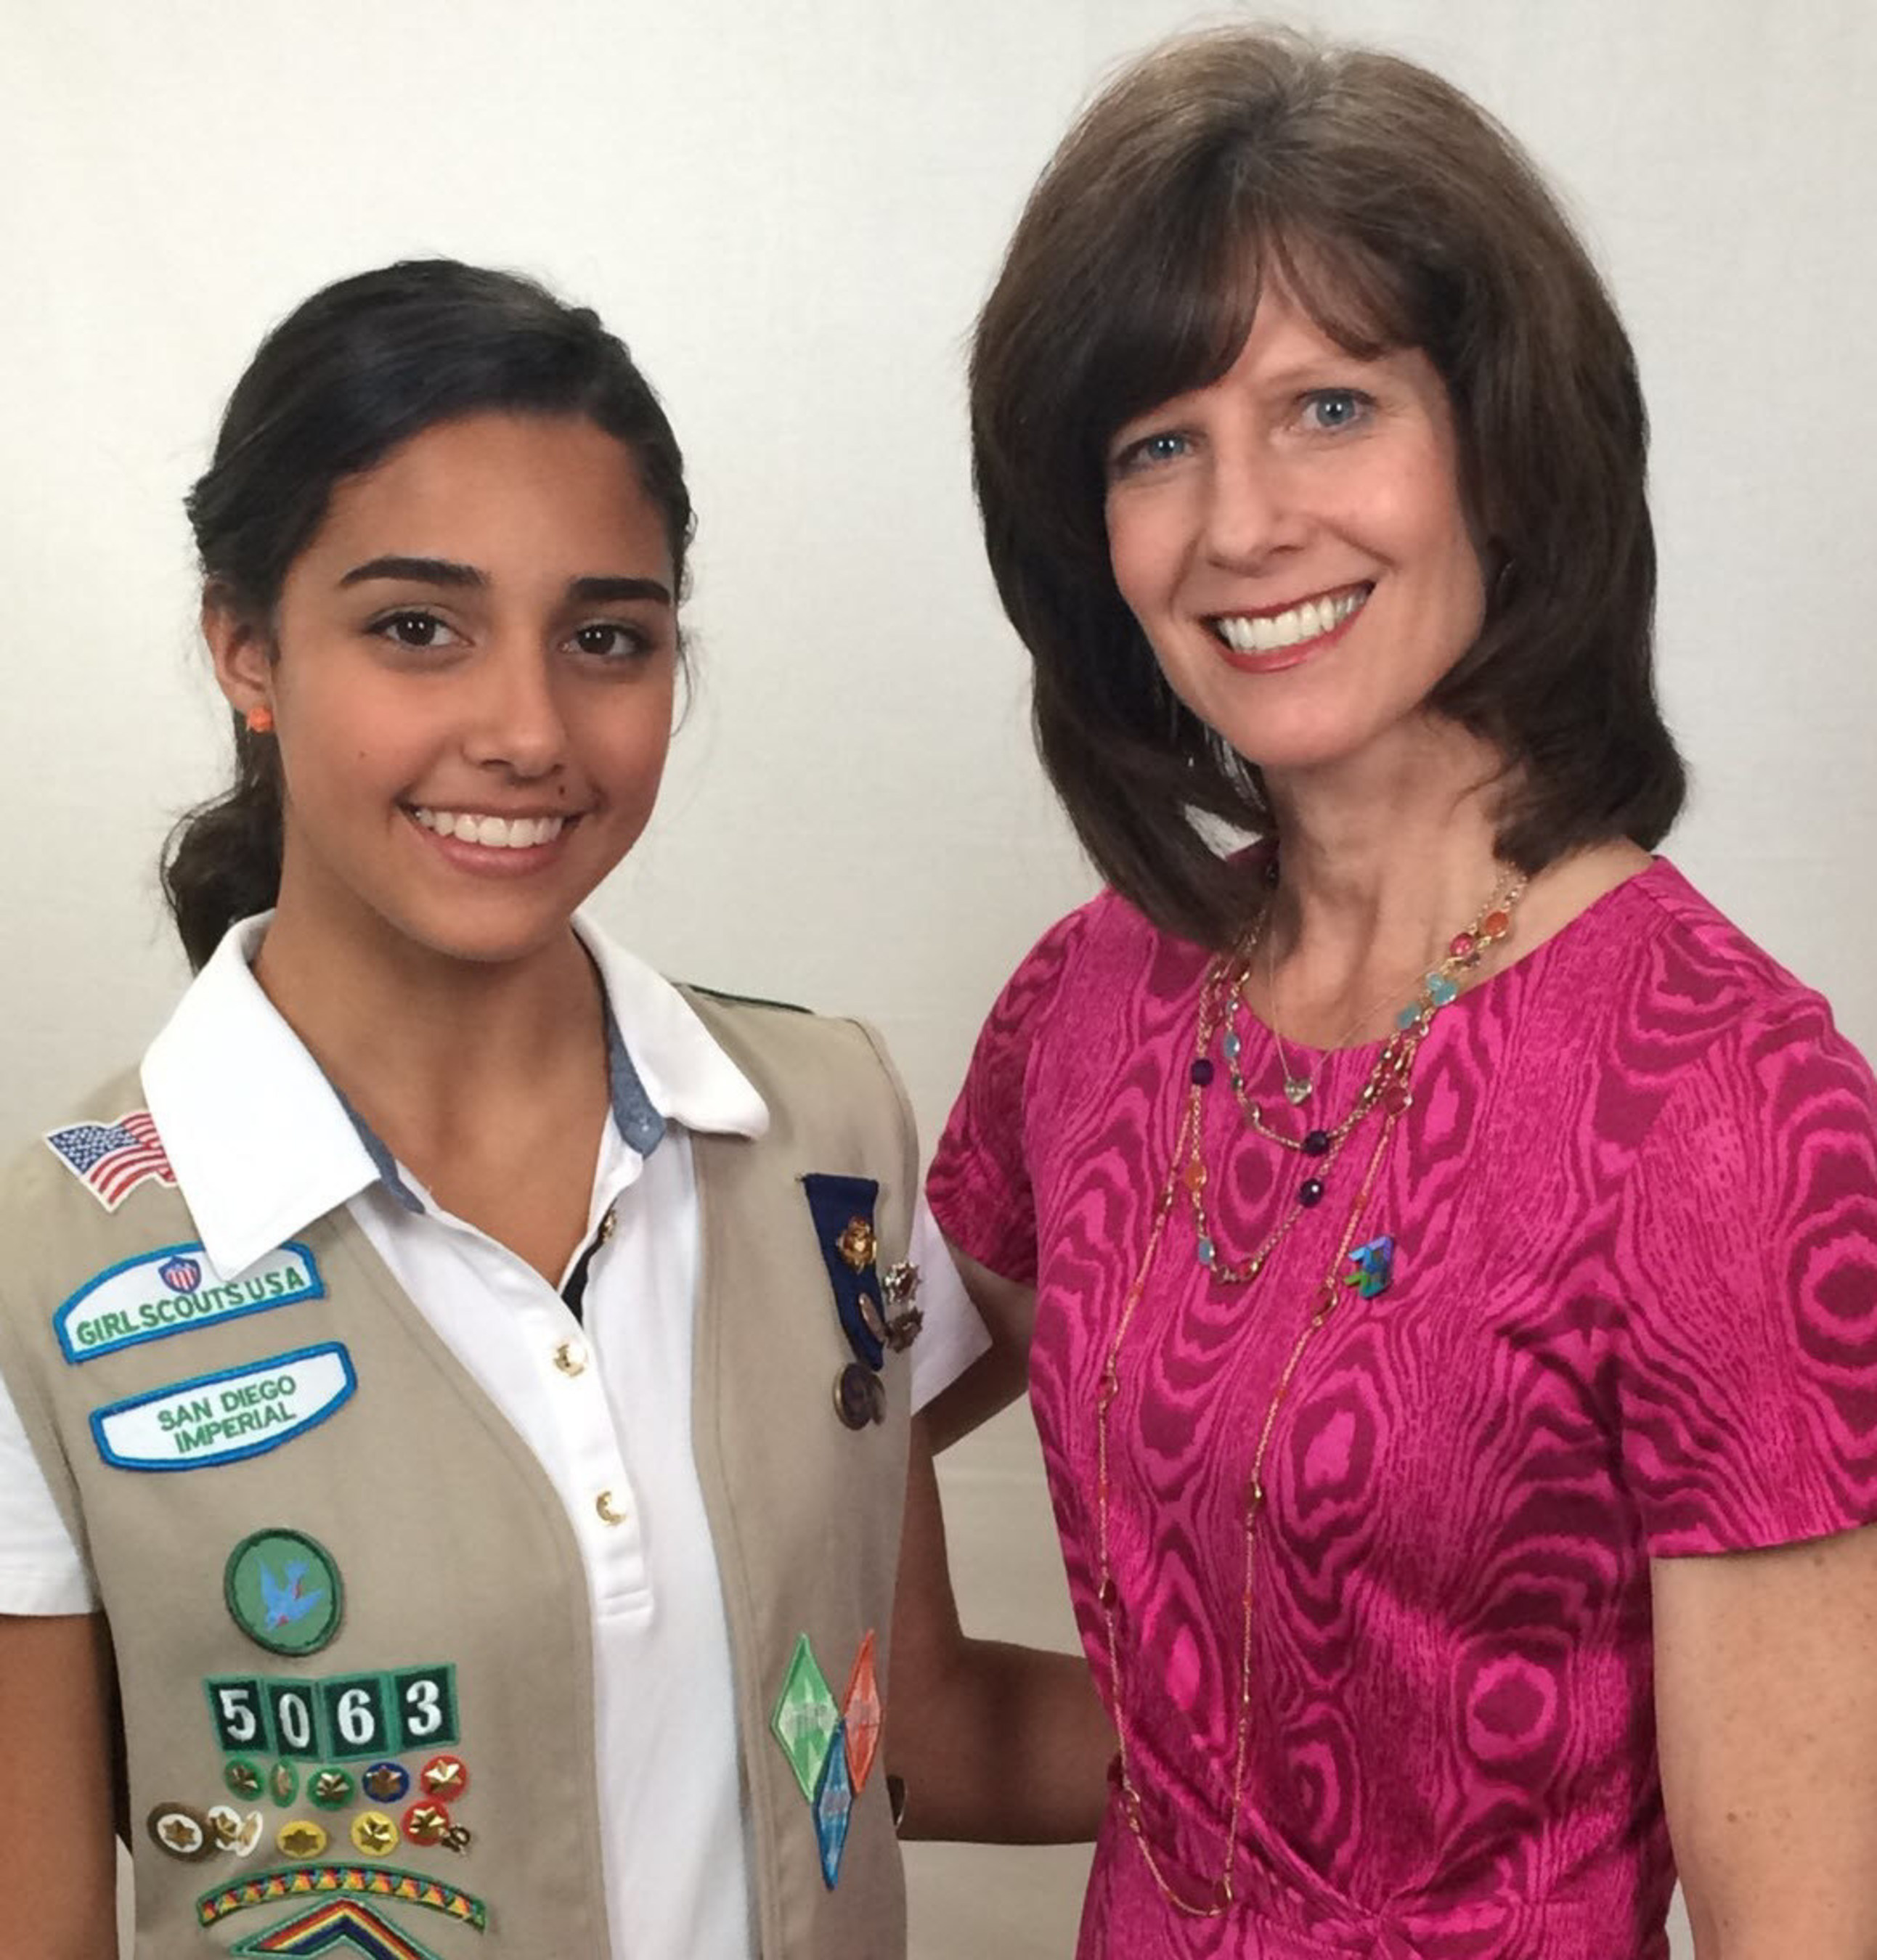 AMN Healthcare CEO Susan Salka, named one of Girl Scouts San Diego's Cool Women 2015, with Troop 5063 member Cristina De Almeida Amaral